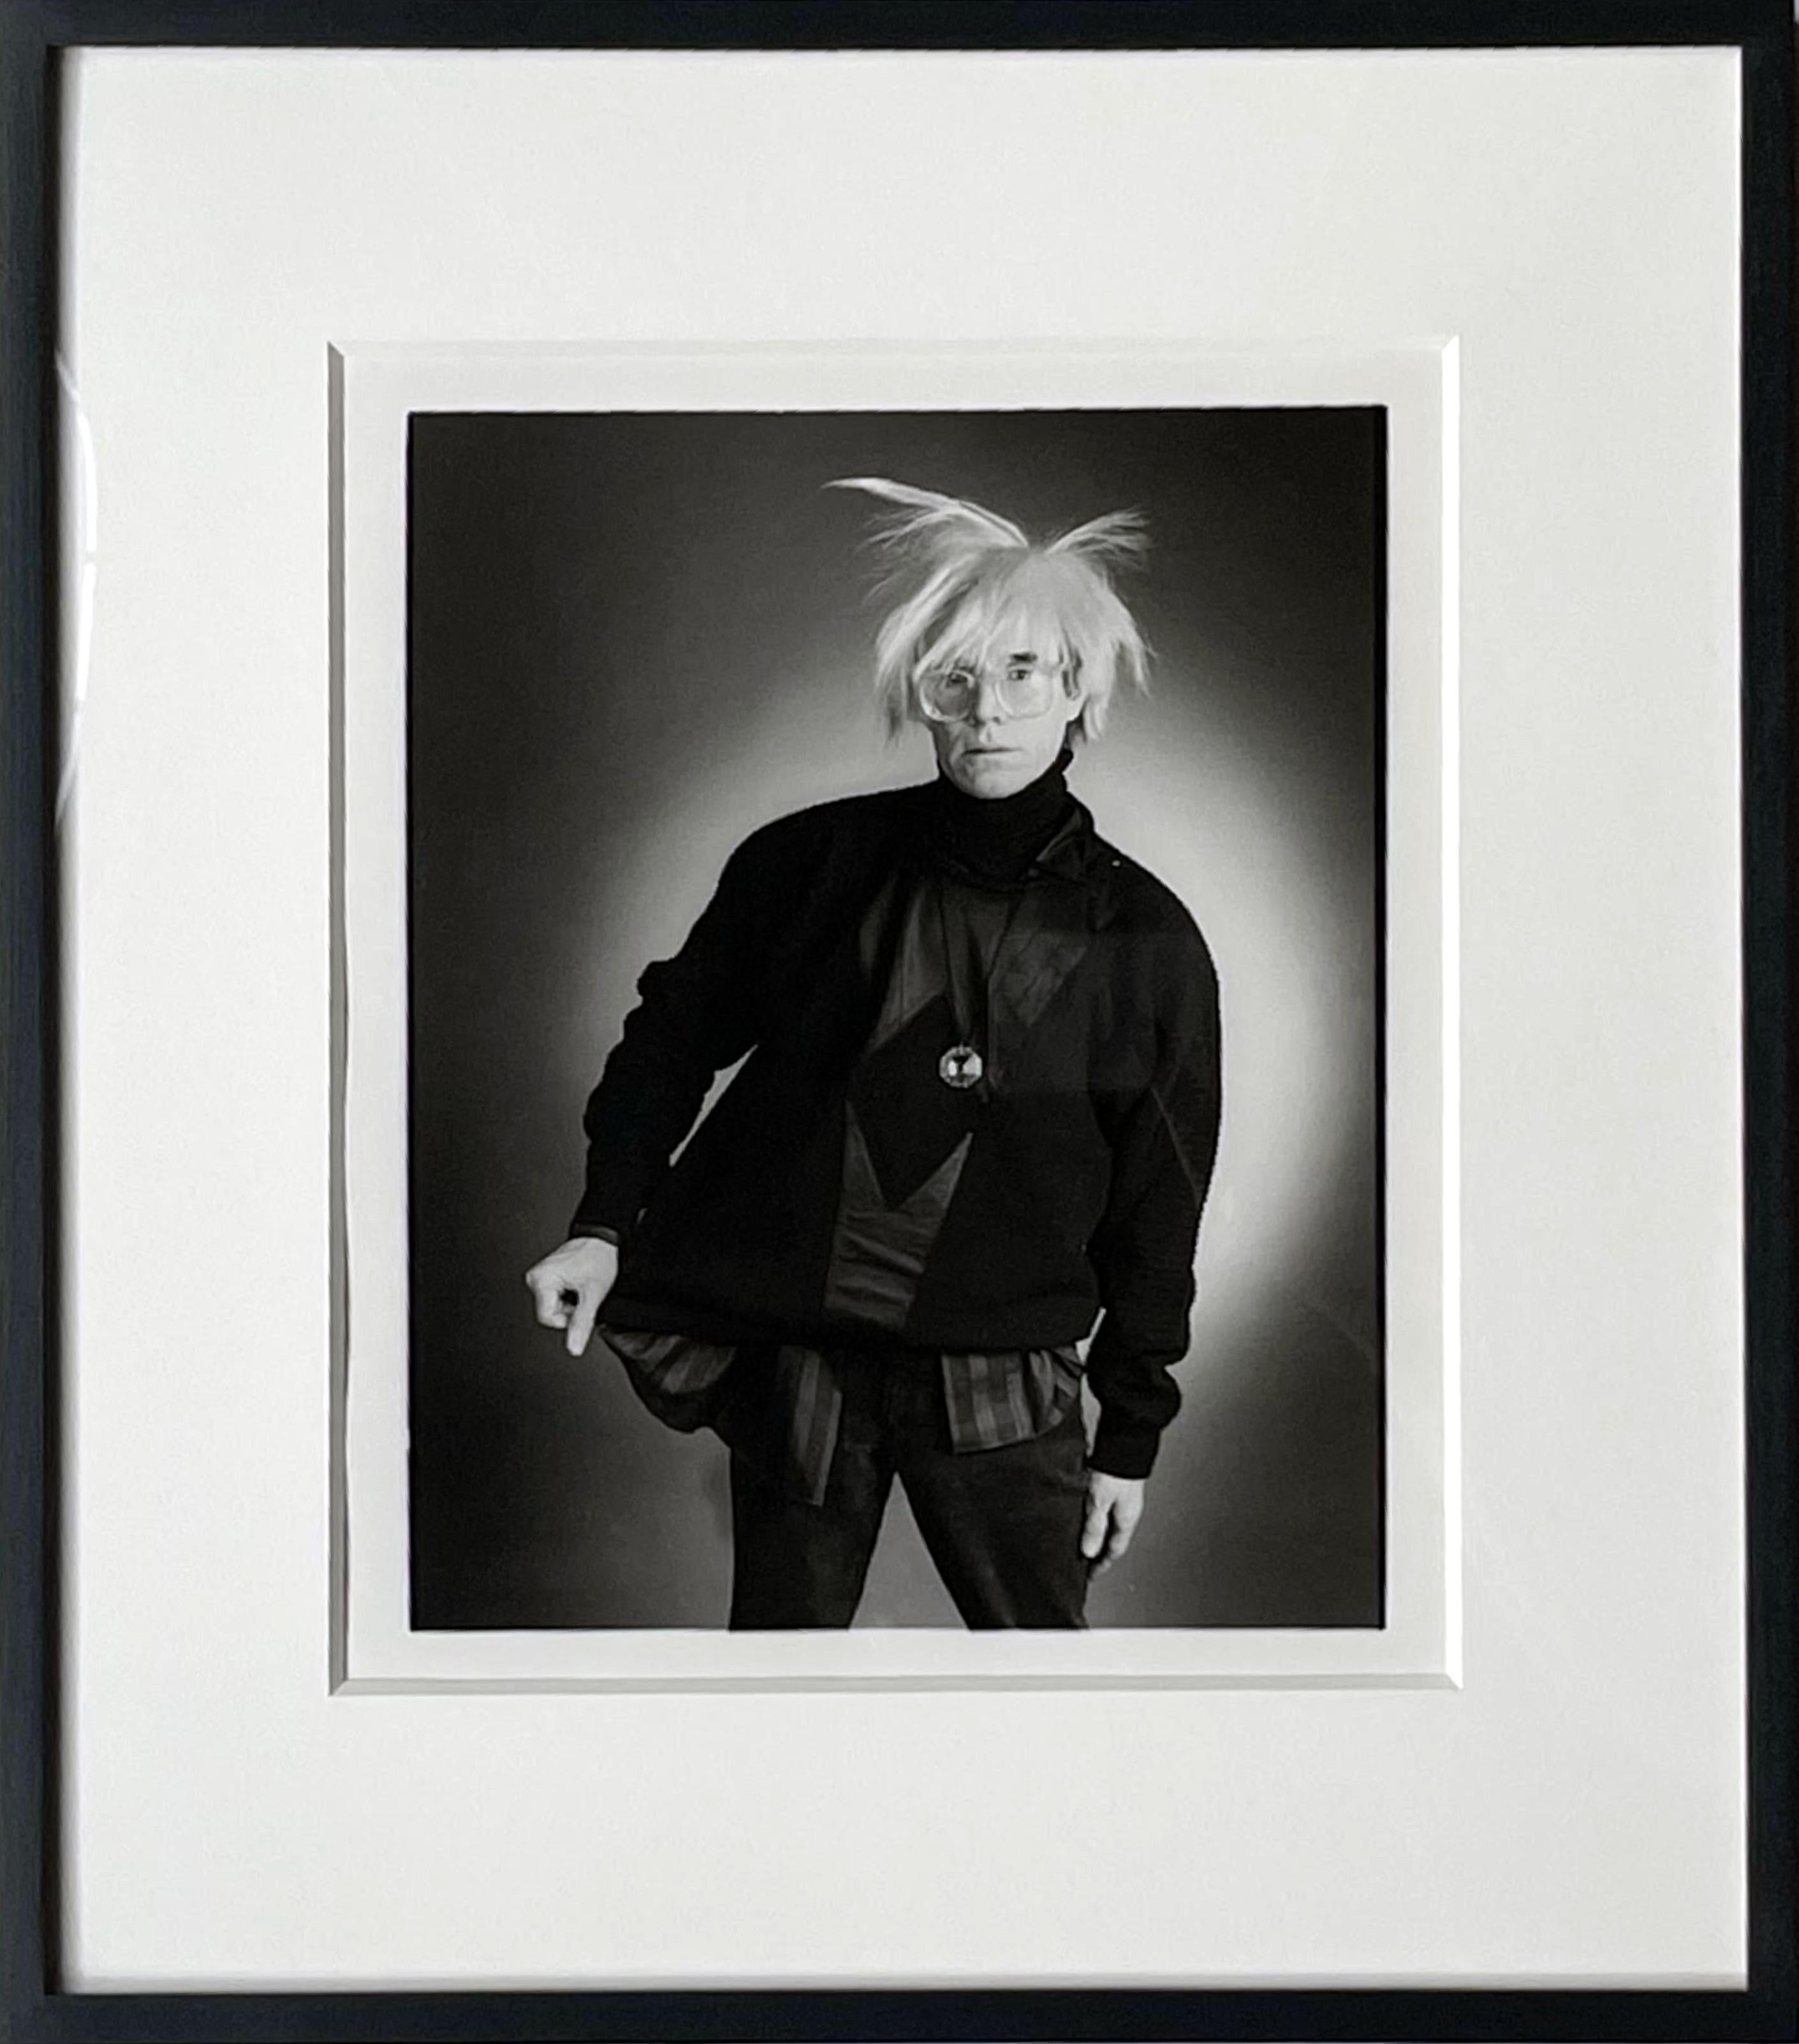 Portrait of Andy Warhol, hand signed by BOTH Andy Warhol and Christopher Makos - Photograph by Christopher Makos and Andy Warhol